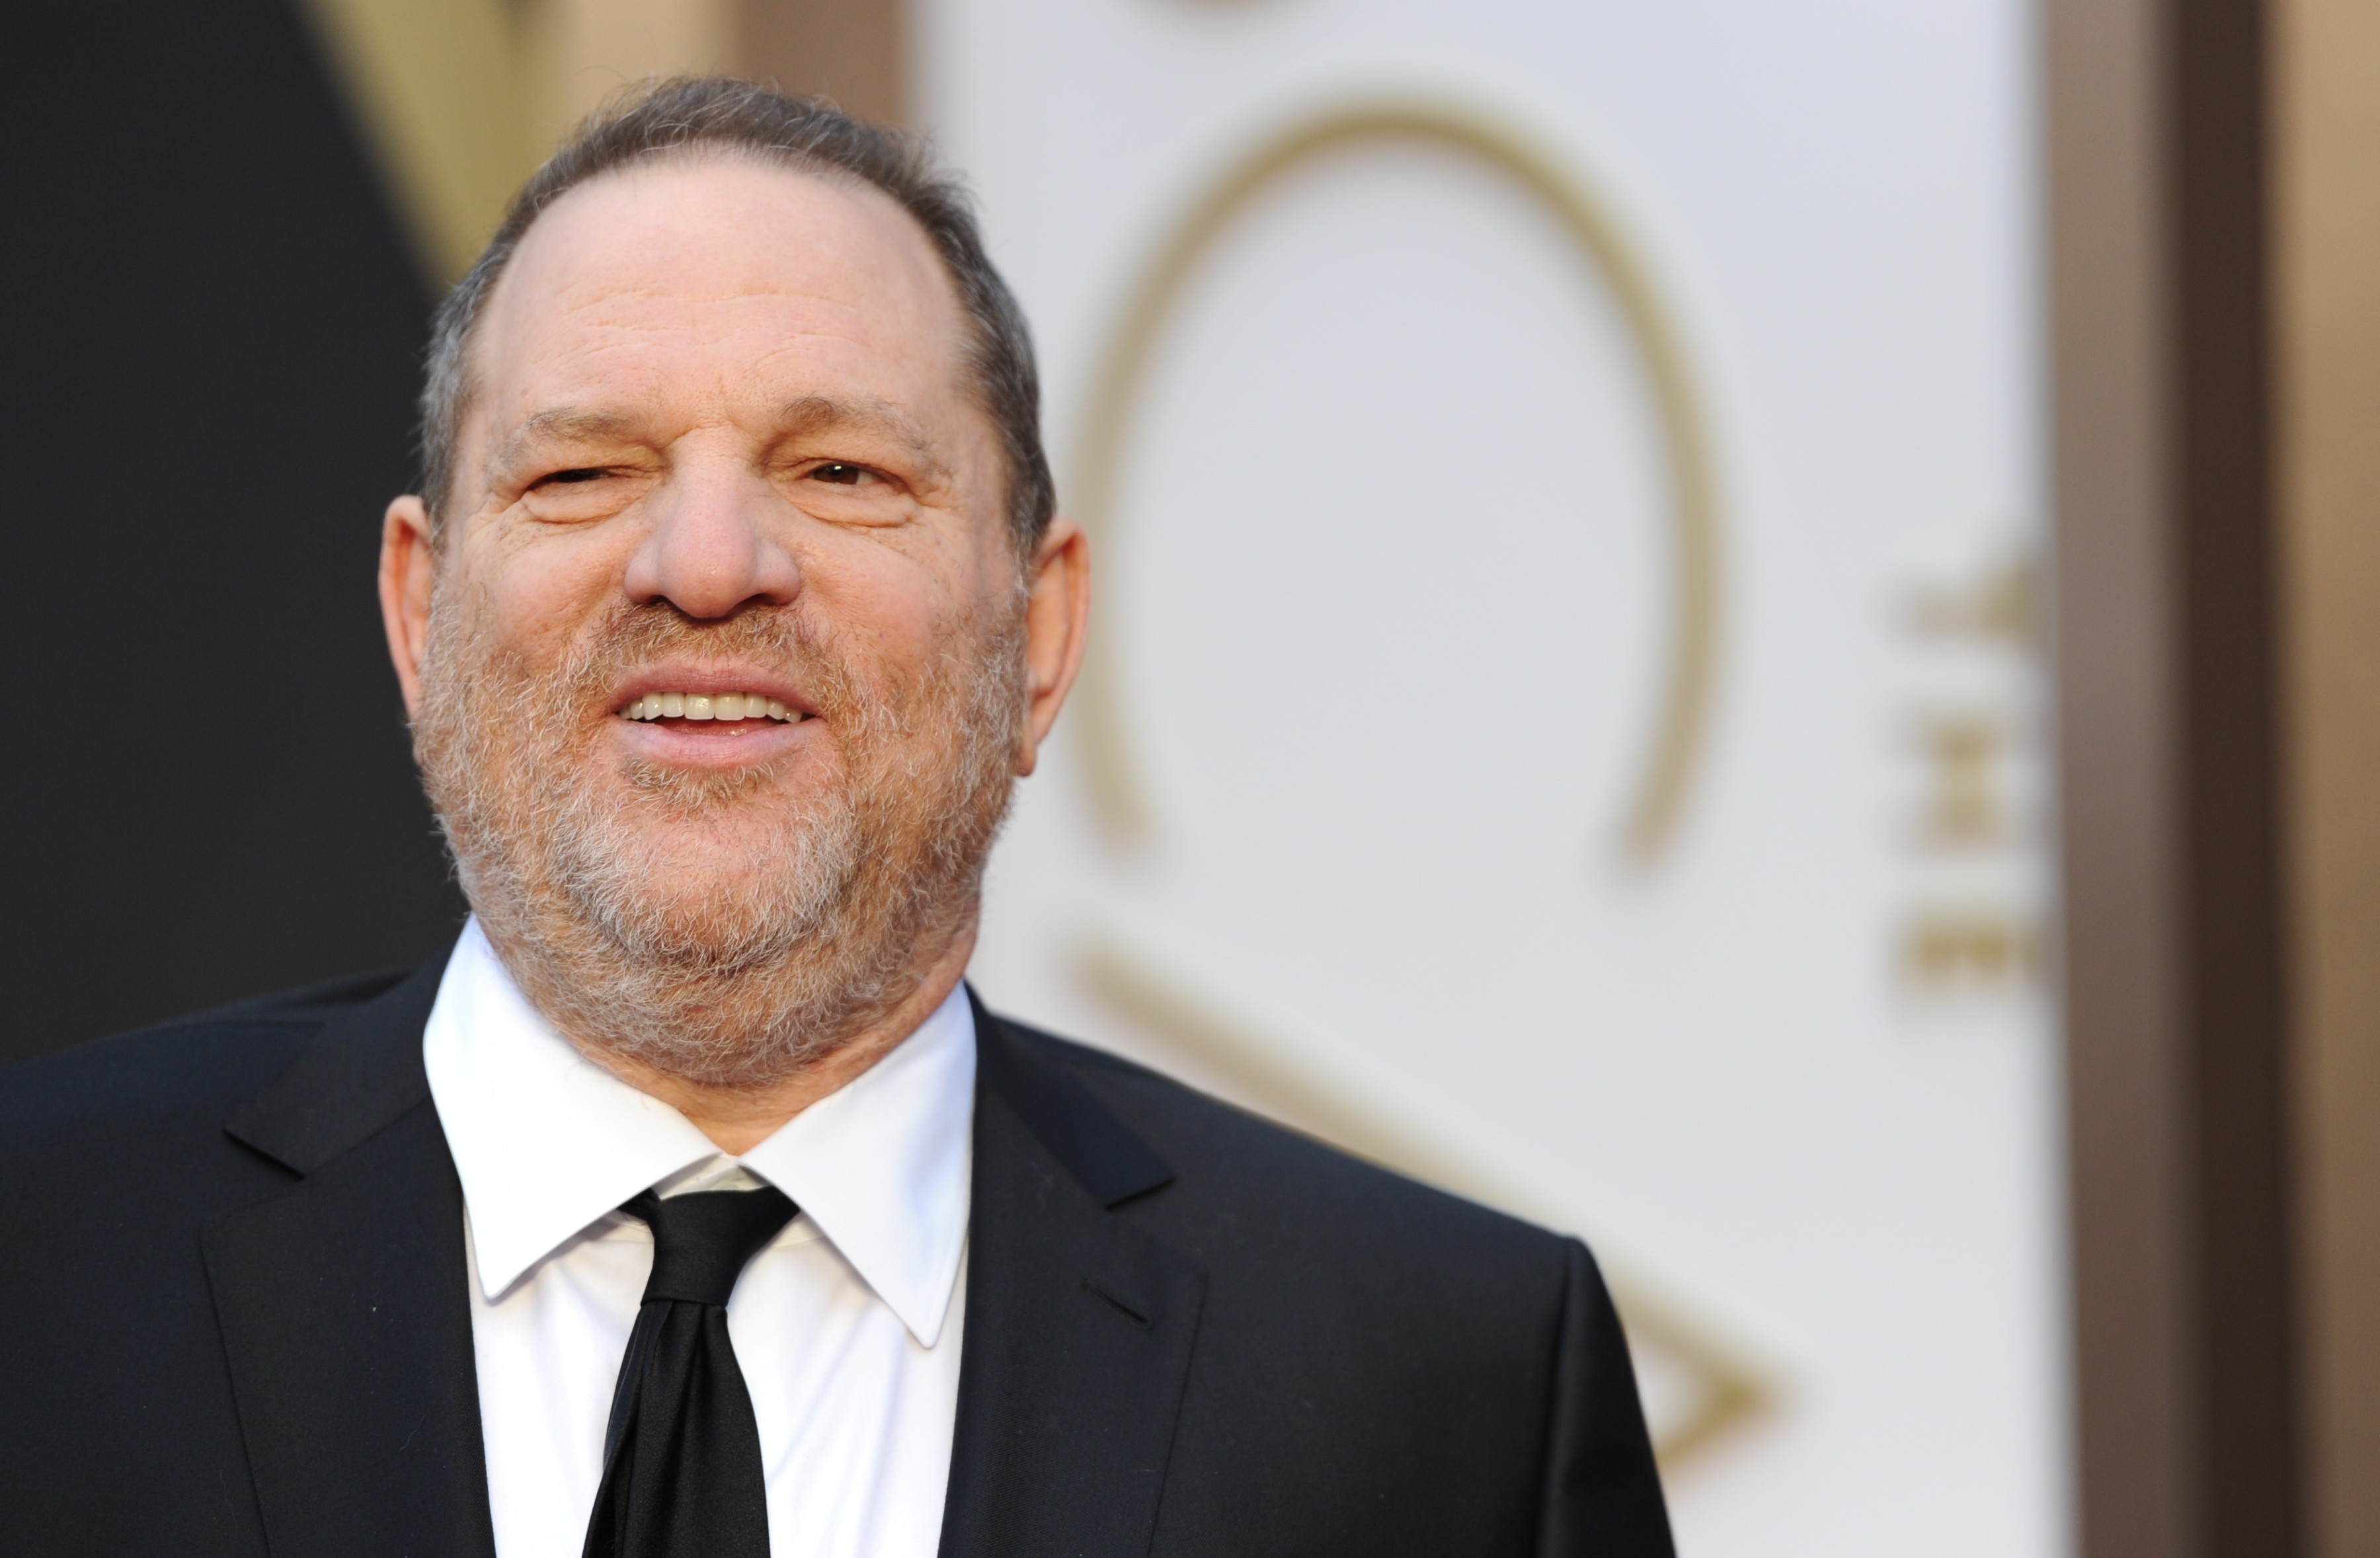 Producer Harvey Weinstein arrives for the 86th Academy Awards in Hollywood in March 2014. The Academy of Motion Picture Arts and Sciences has expelled Weinstein amid mounting sexual harassment, assault and rape accusations. Photo: AFP